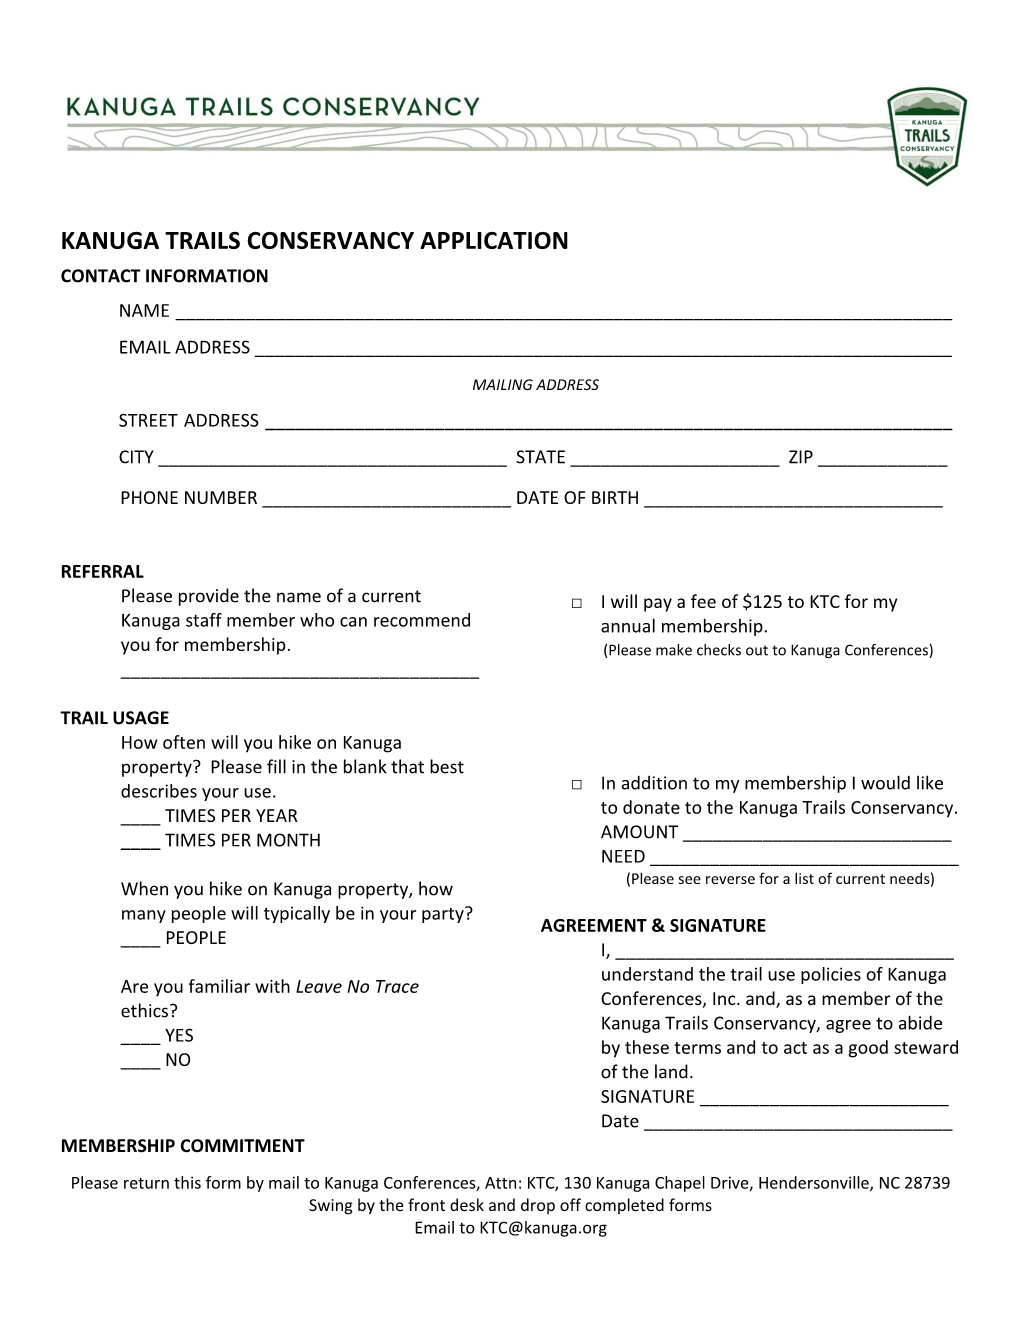 Kanuga Trails Conservancy Application Contact Information Name ______Email Address ______